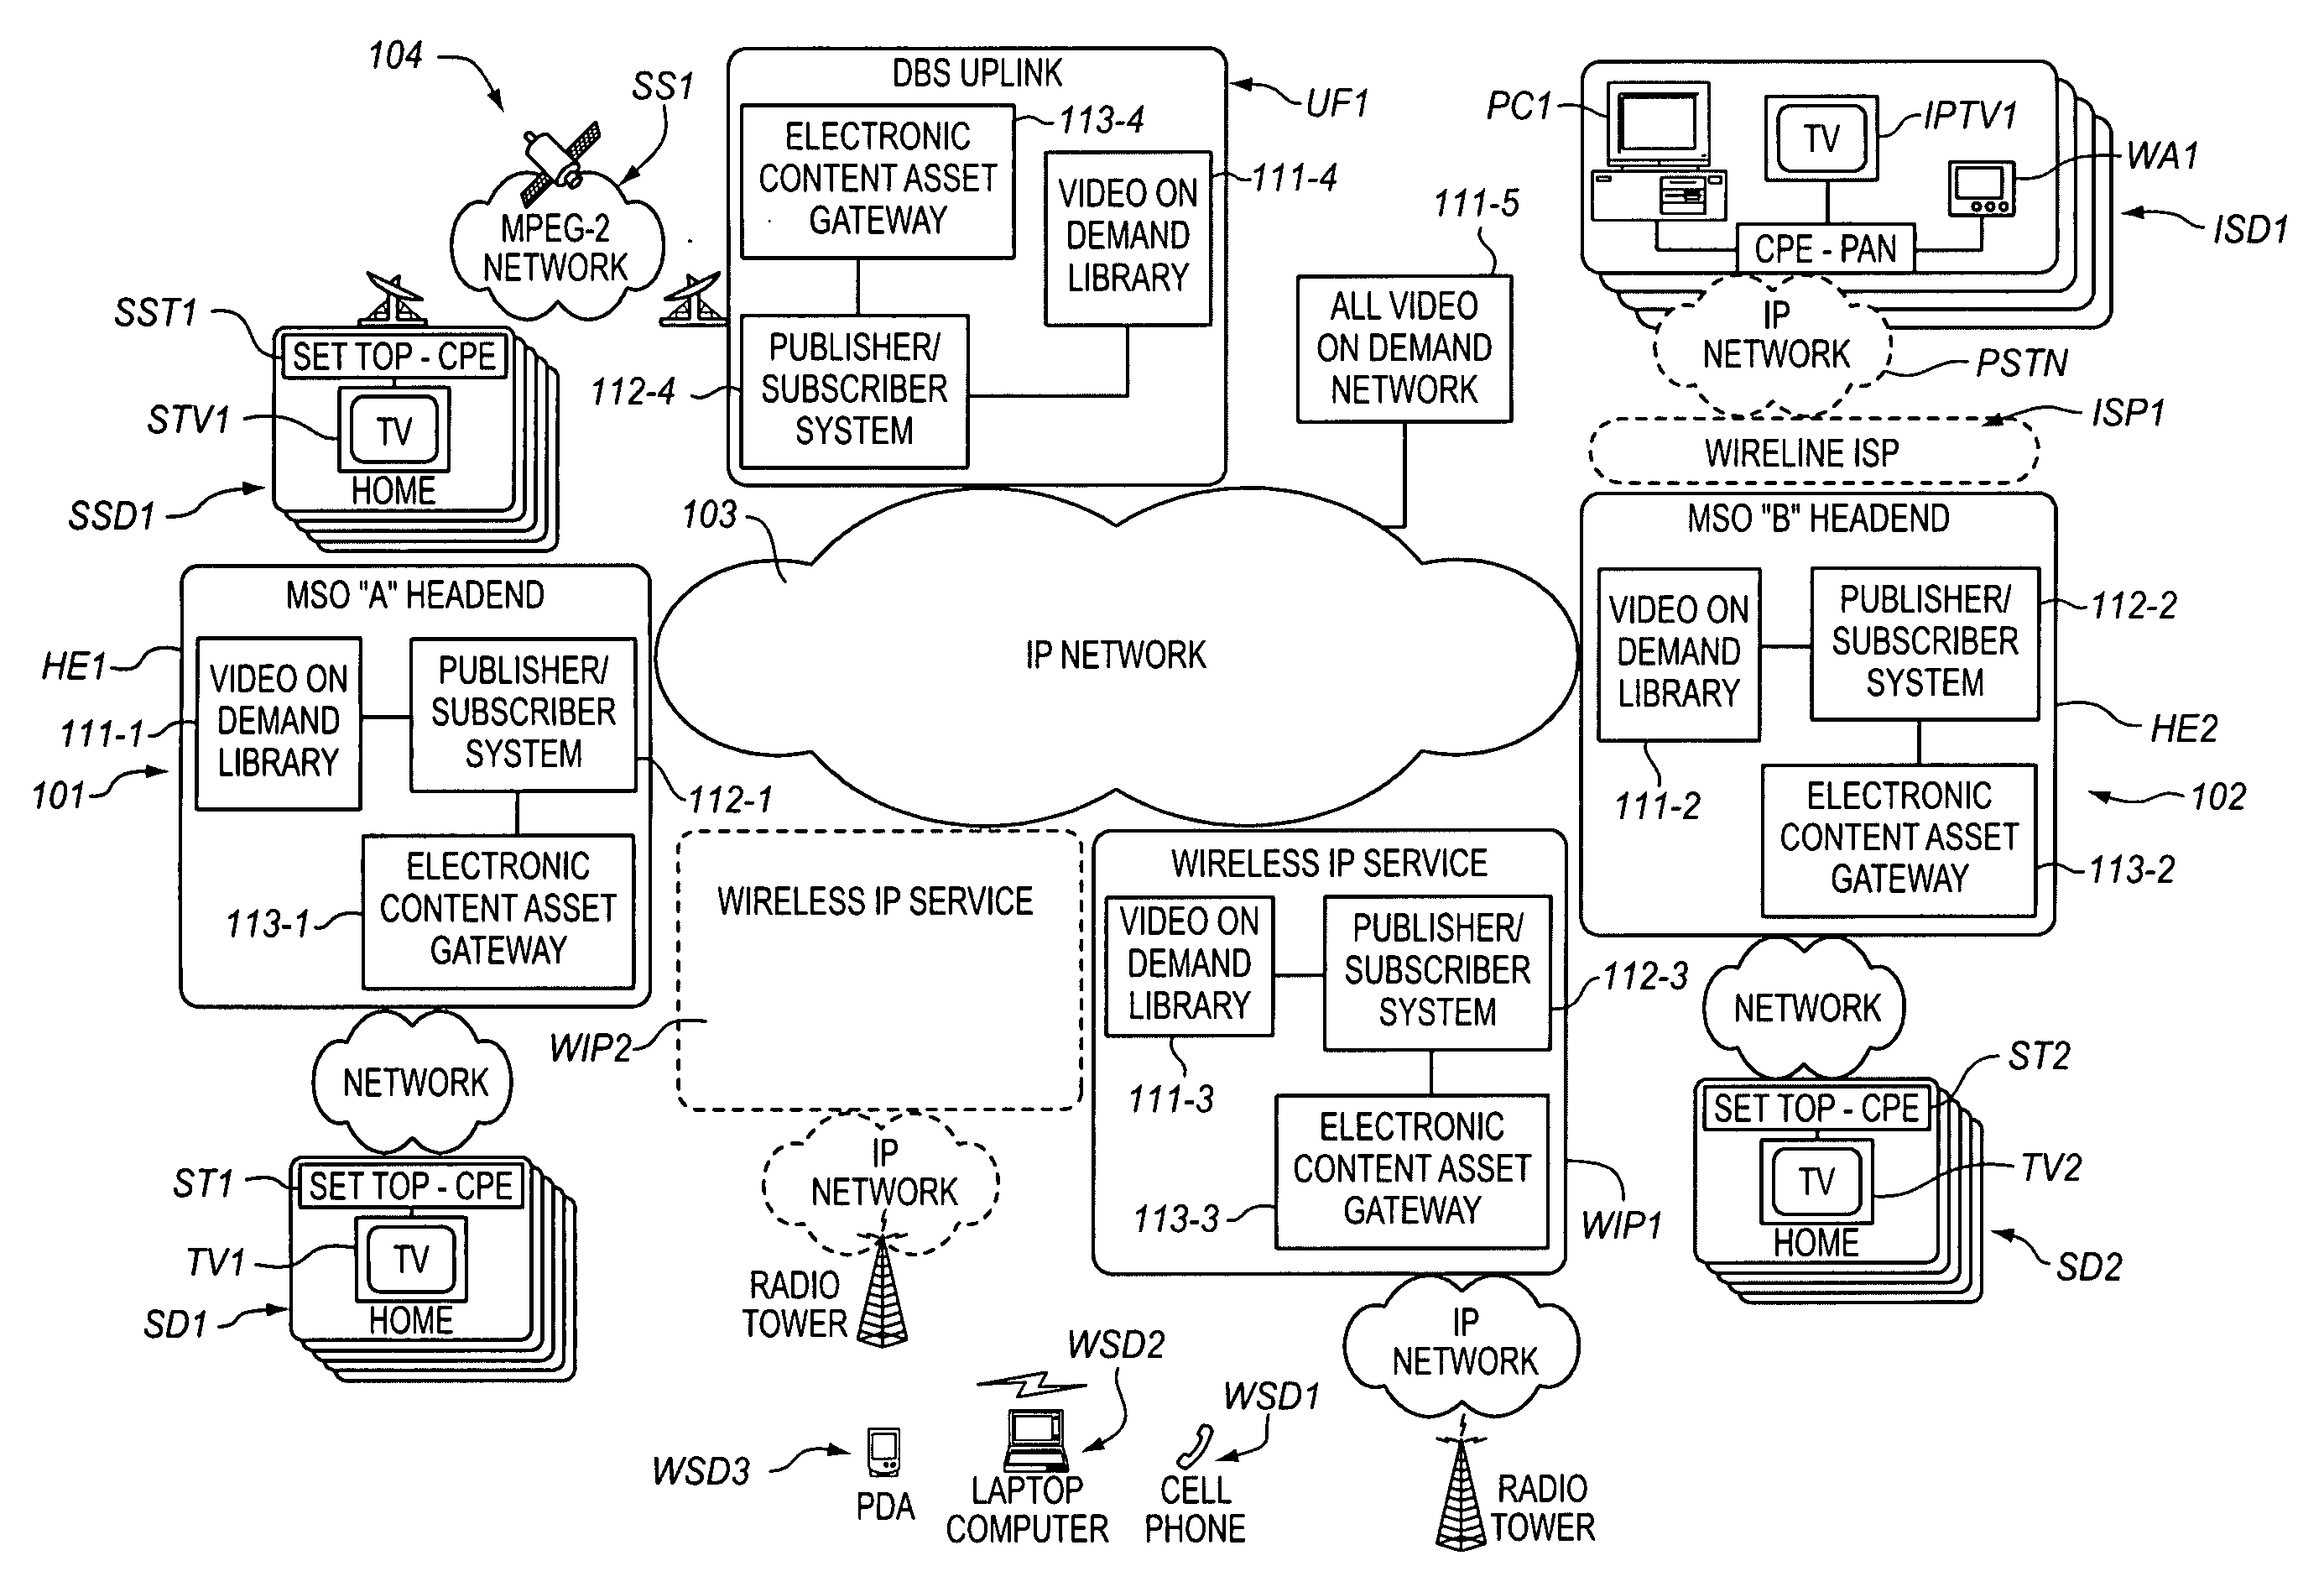 System for distributing electronic content assets over communication media having differing characteristics